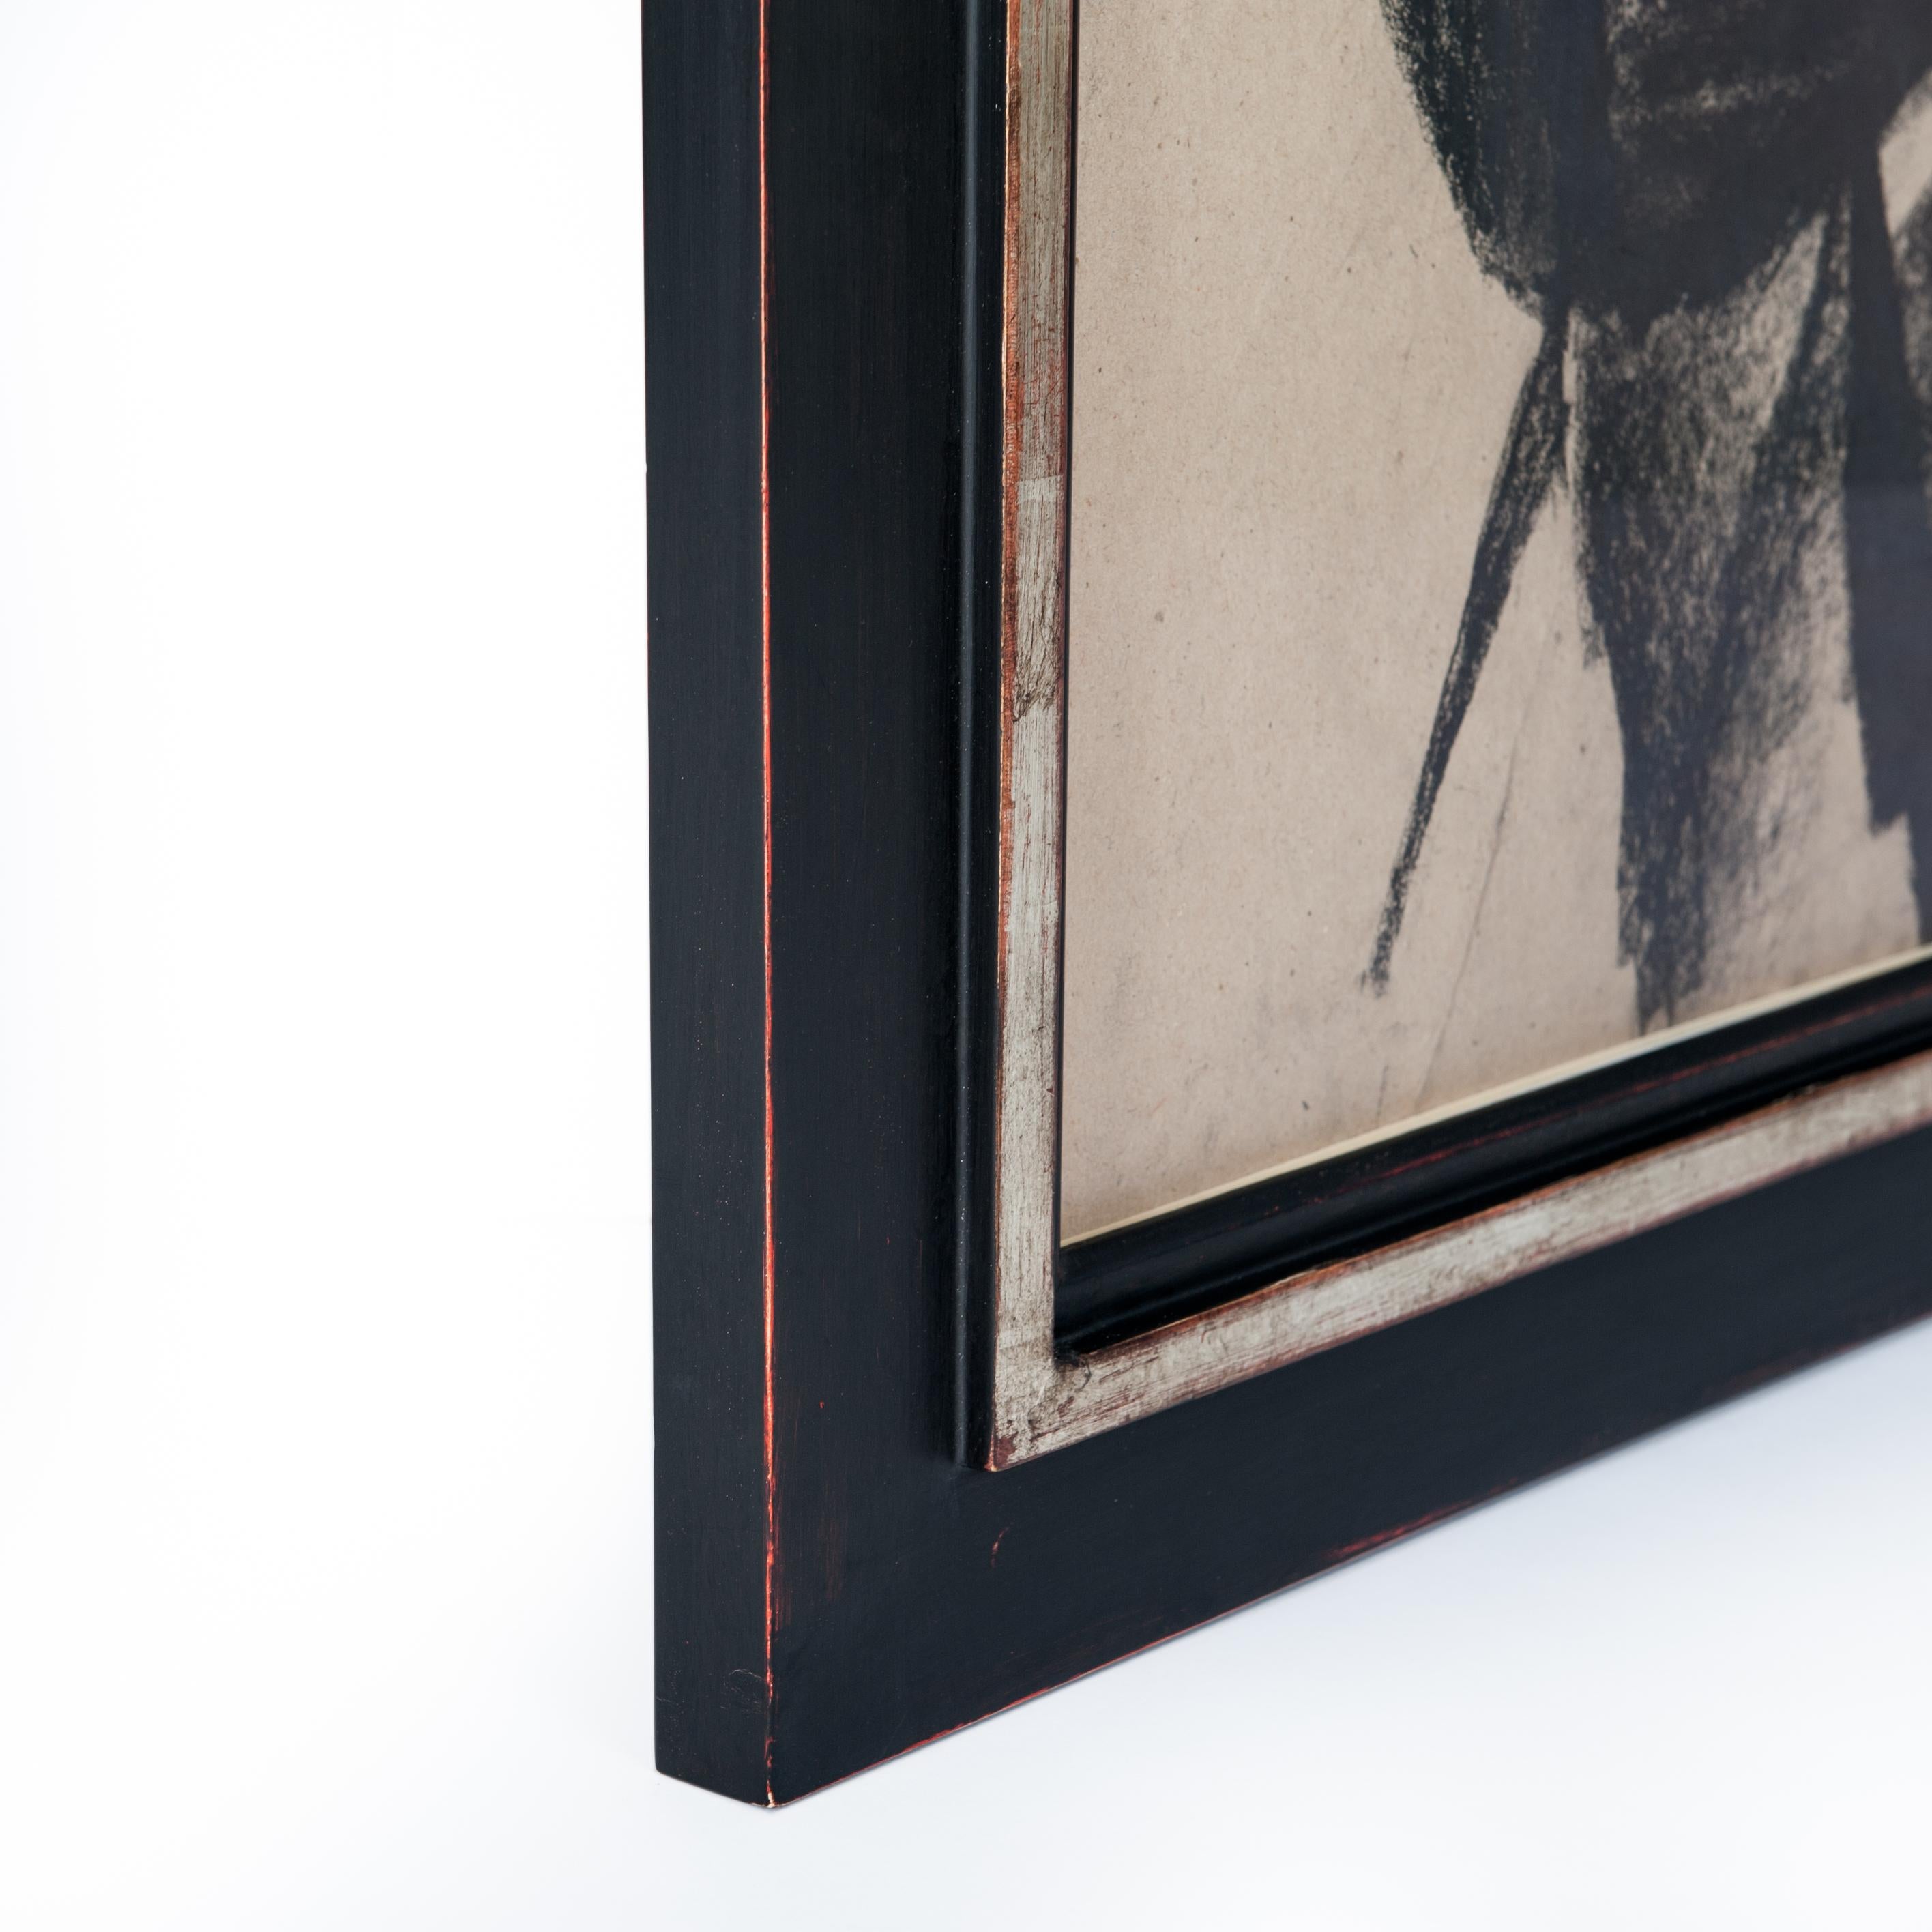 Charcoal Drawing Black, Beige, Red and White Michel Batlle 1987 Handworked Frame In Good Condition For Sale In Salzburg, AT